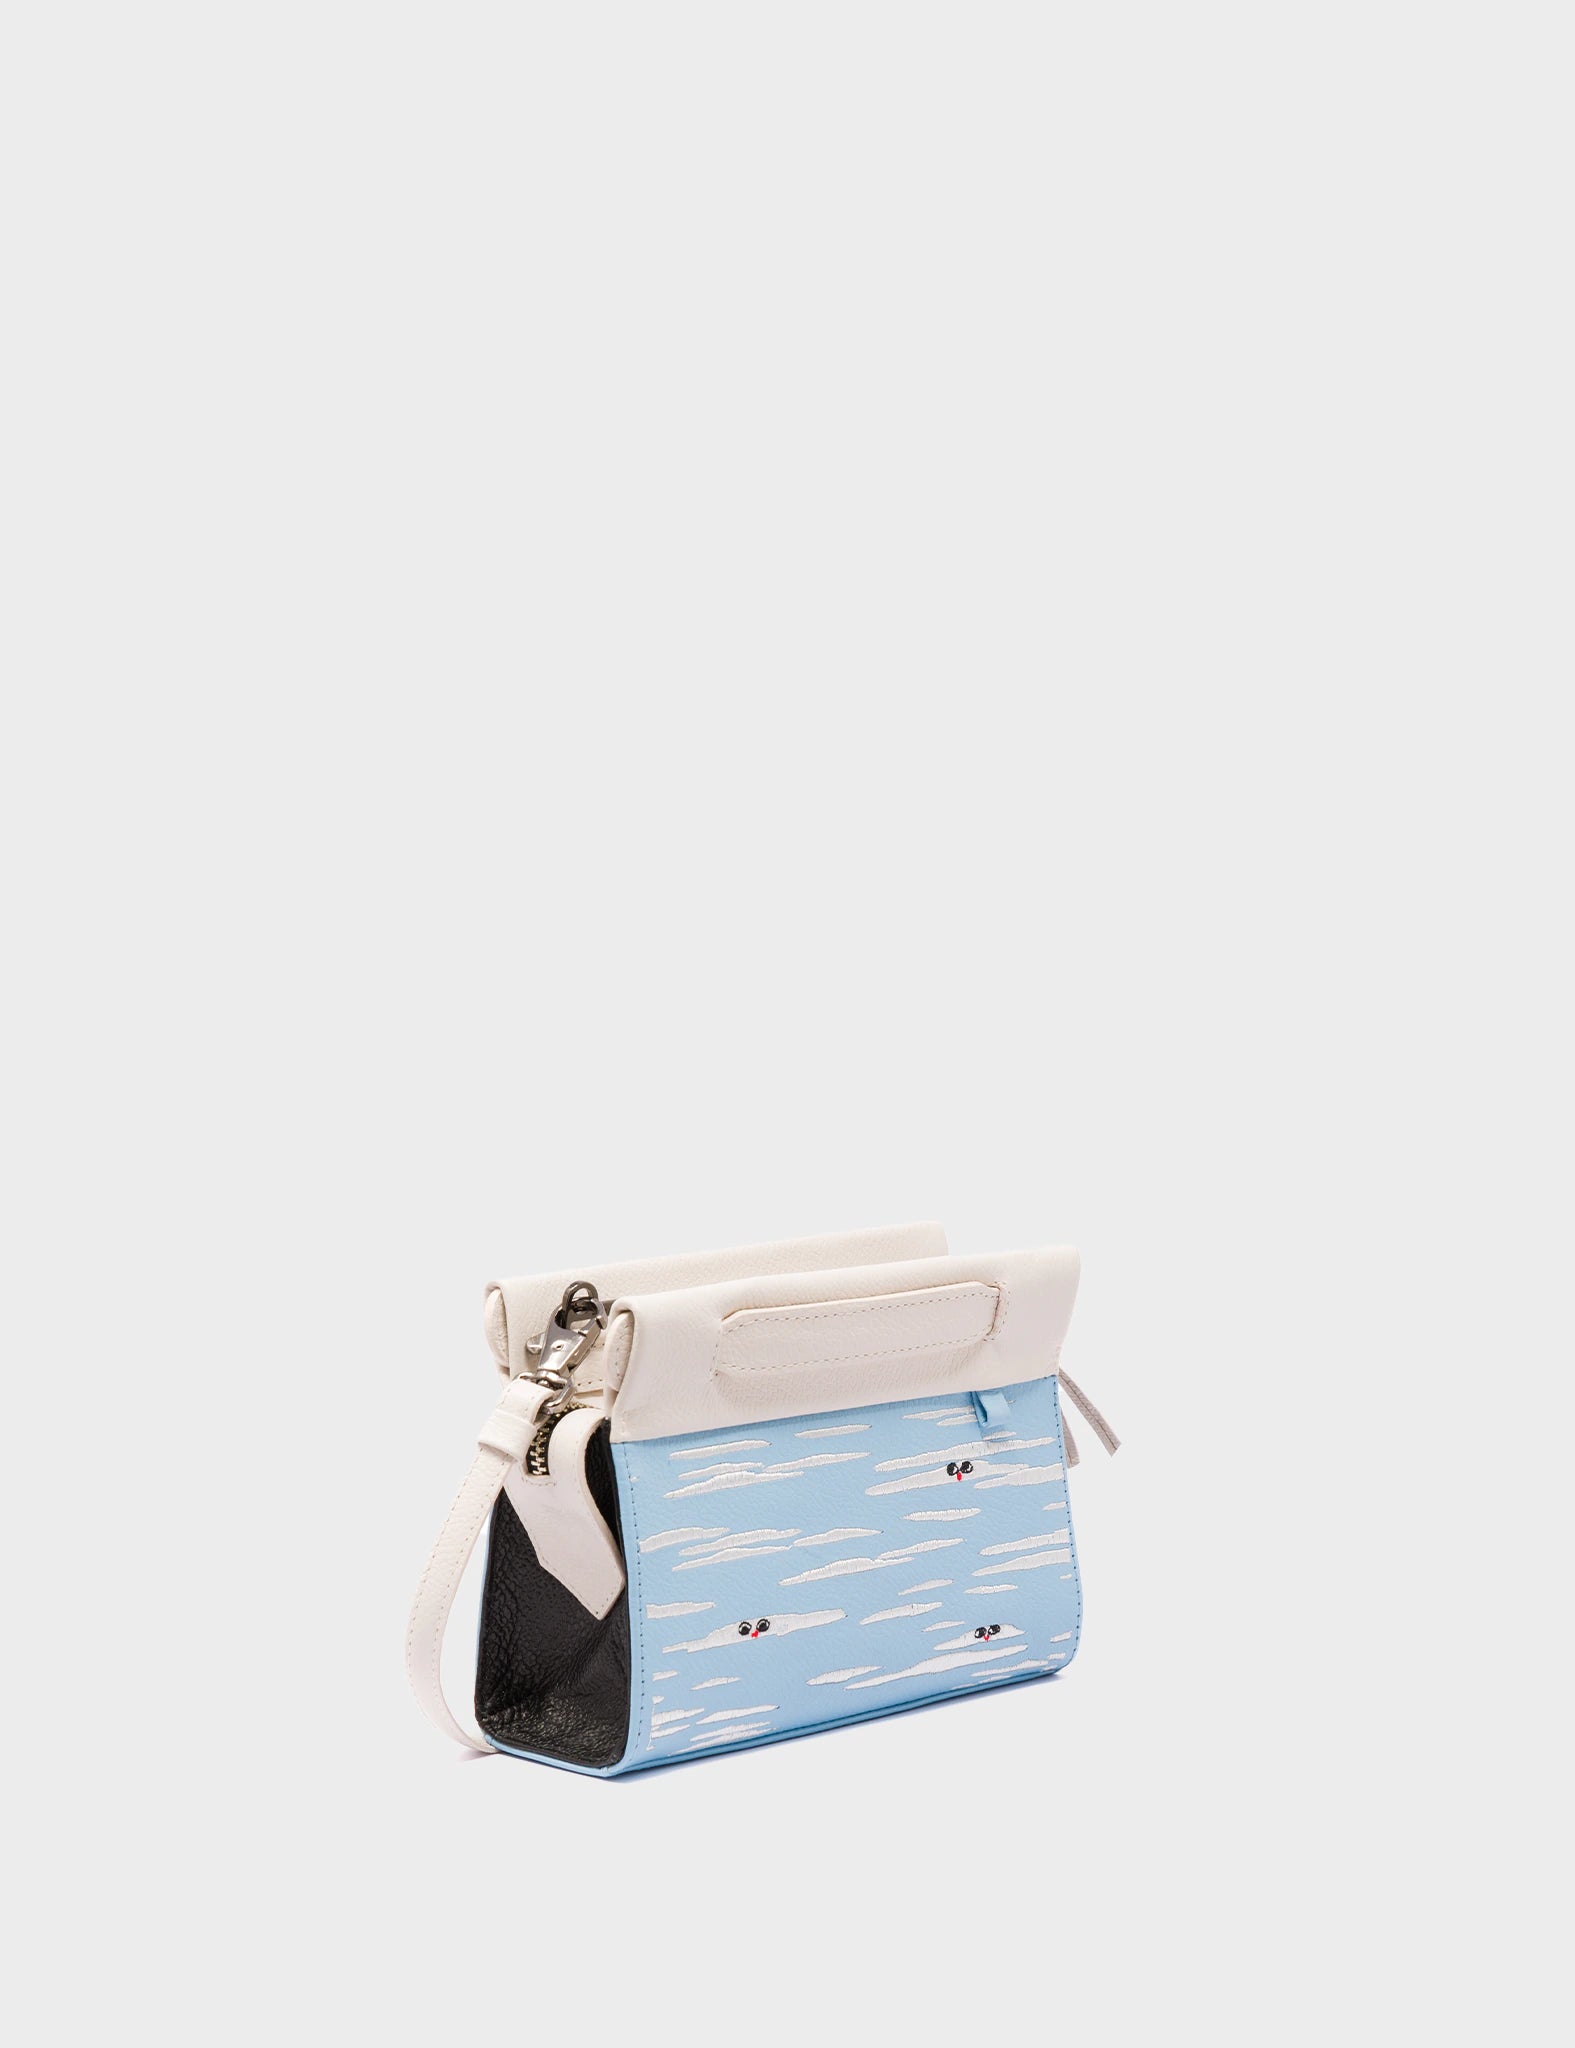 Crossbody Micro Blue Leather Bag - Clouds Embroidery